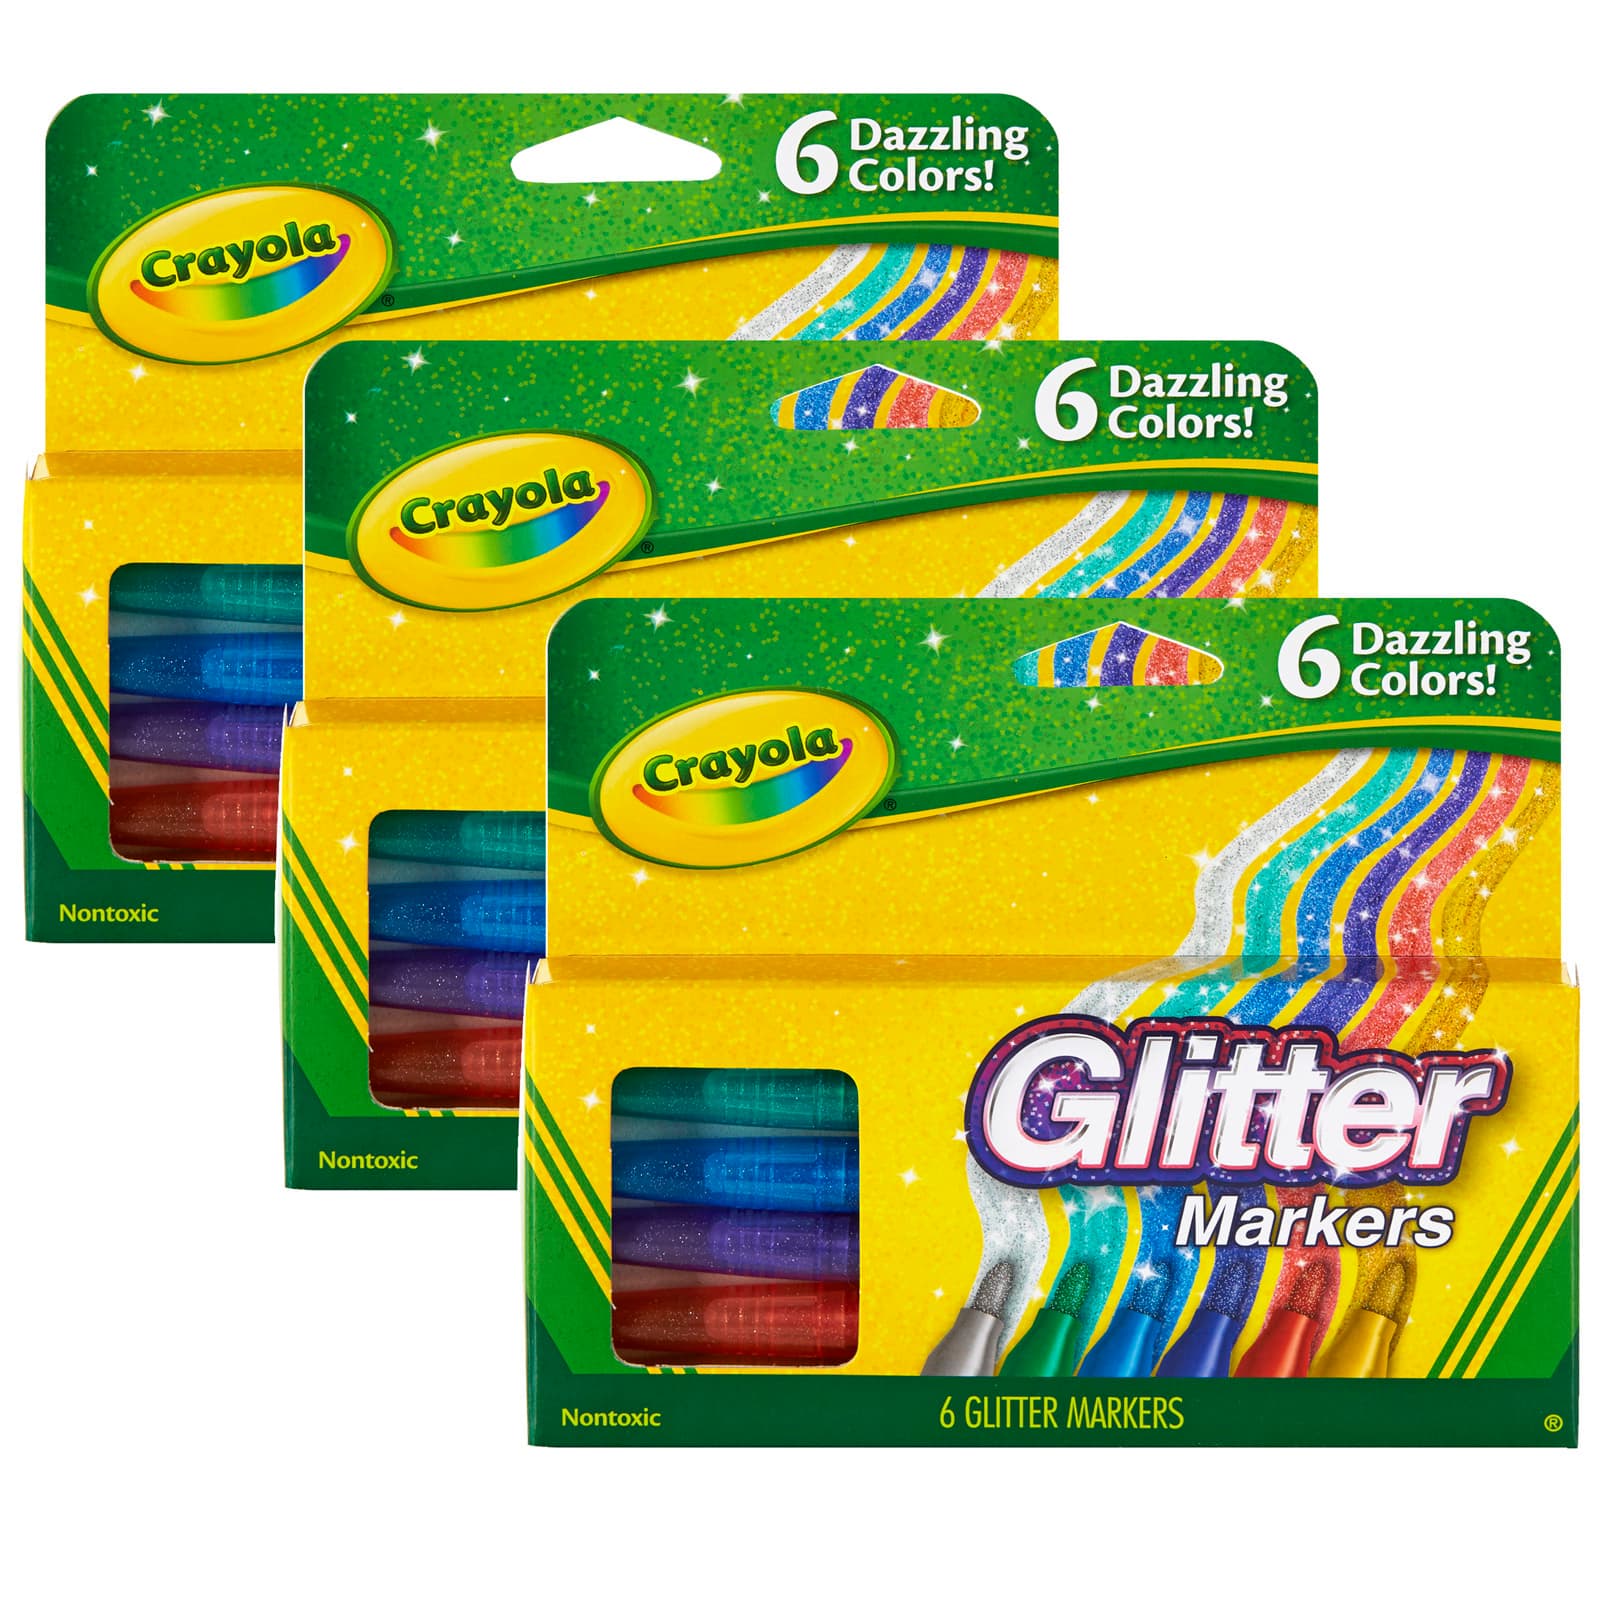 8 Packs: 3 Packs 6 ct. (144 total) Crayola® Glitter Markers